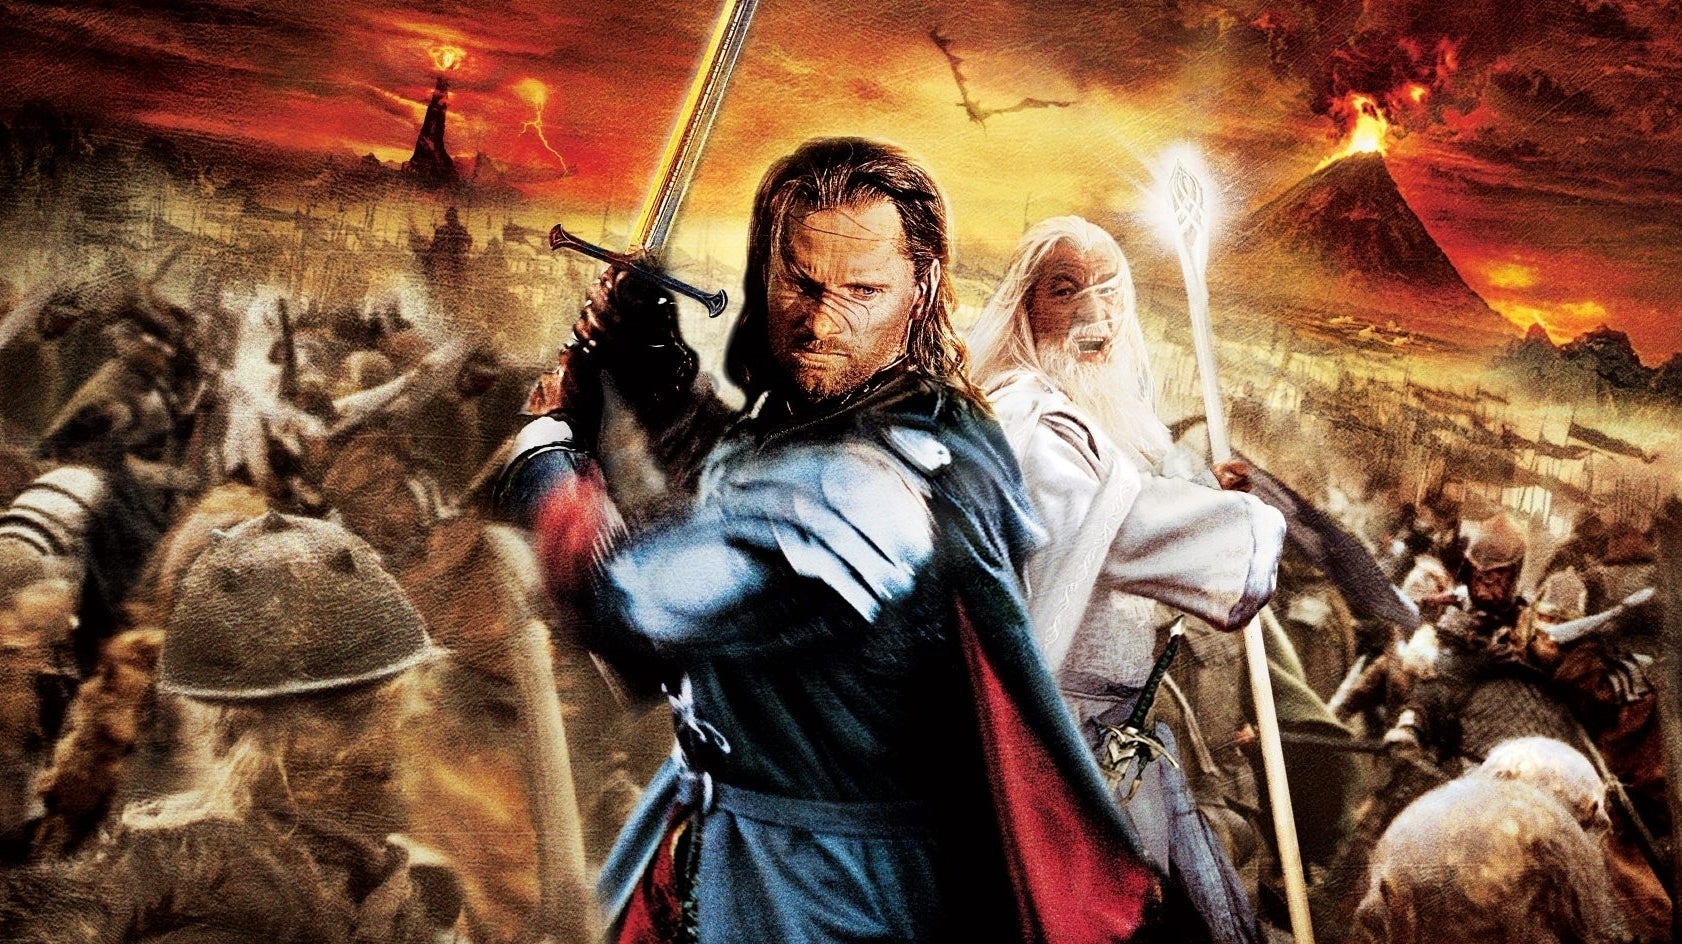 Image for The Double-A Team: The Lord of the Rings: The Return of the King was the good kind of cheese